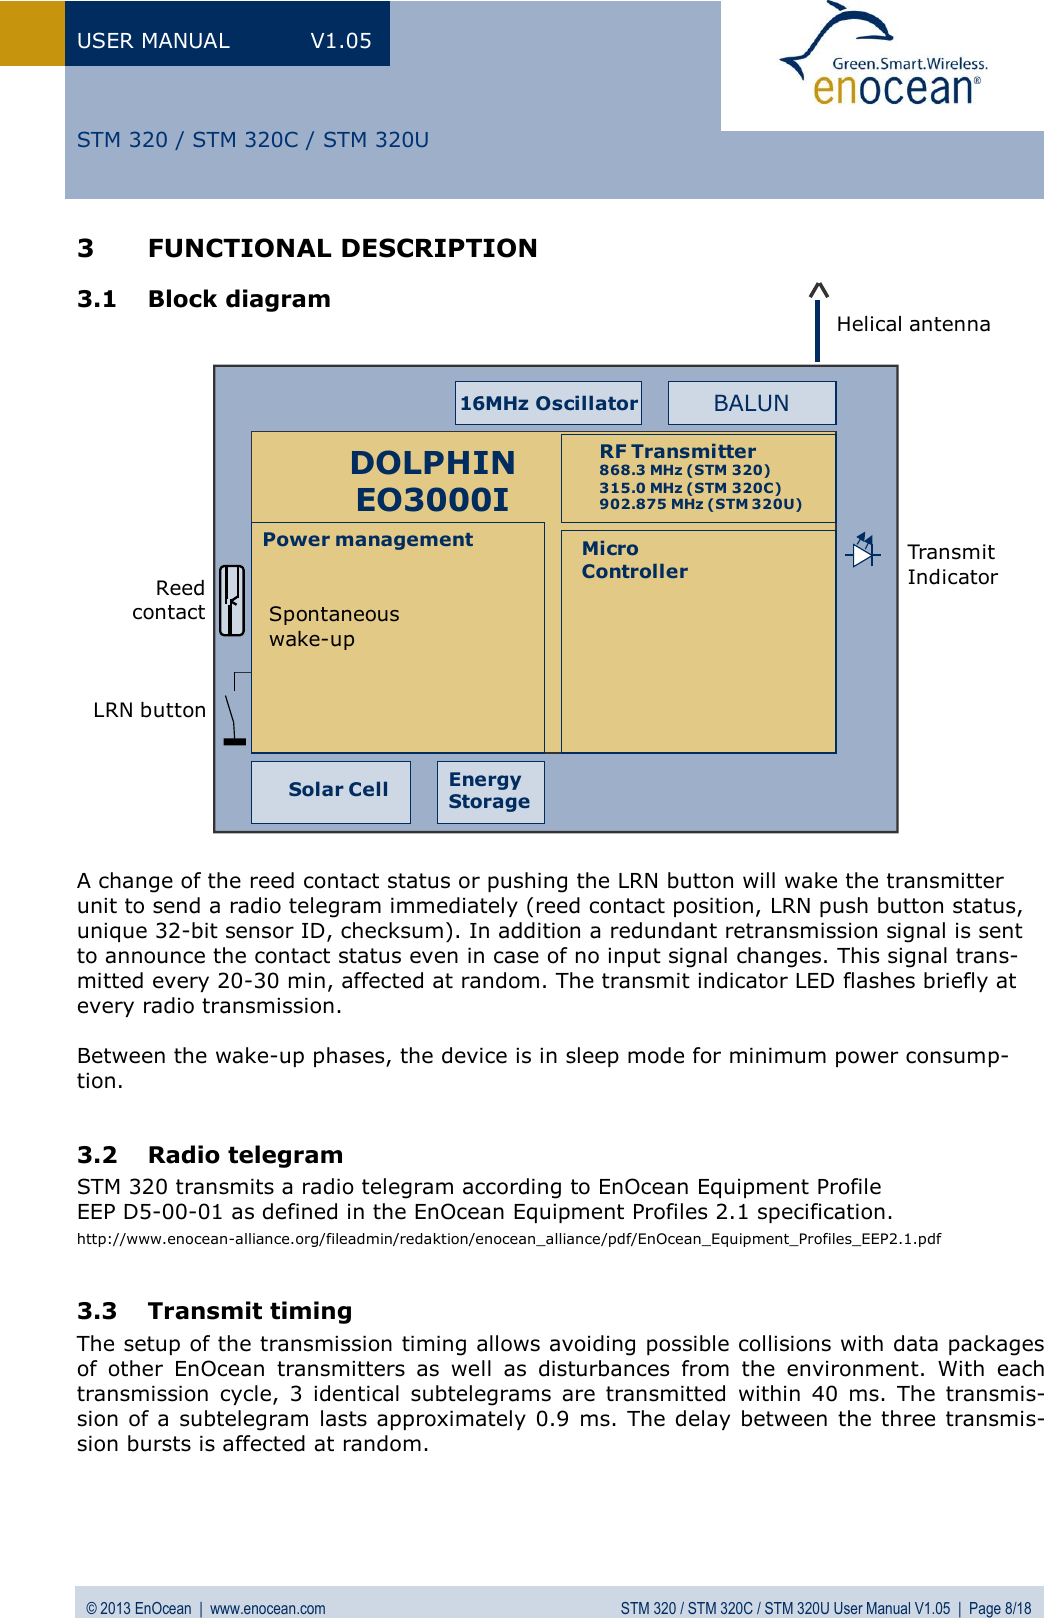 USER MANUAL  V1.05 © 2013 EnOcean  |  www.enocean.com  STM 320 / STM 320C / STM 320U User Manual V1.05  |  Page 8/18   STM 320 / STM 320C / STM 320U 3 FUNCTIONAL DESCRIPTION 3.1 Block diagram                       A change of the reed contact status or pushing the LRN button will wake the transmitter unit to send a radio telegram immediately (reed contact position, LRN push button status, unique 32-bit sensor ID, checksum). In addition a redundant retransmission signal is sent to announce the contact status even in case of no input signal changes. This signal trans-mitted every 20-30 min, affected at random. The transmit indicator LED flashes briefly at every radio transmission.   Between the wake-up phases, the device is in sleep mode for minimum power consump-tion.  3.2 Radio telegram STM 320 transmits a radio telegram according to EnOcean Equipment Profile  EEP D5-00-01 as defined in the EnOcean Equipment Profiles 2.1 specification. http://www.enocean-alliance.org/fileadmin/redaktion/enocean_alliance/pdf/EnOcean_Equipment_Profiles_EEP2.1.pdf  3.3 Transmit timing  The setup of the transmission timing allows avoiding possible collisions with data packages of  other  EnOcean  transmitters  as  well  as  disturbances  from  the  environment.  With  each transmission  cycle, 3  identical  subtelegrams  are  transmitted  within  40  ms. The  transmis-sion of a subtelegram lasts approximately 0.9 ms. The delay between the three transmis-sion bursts is affected at random.  Helical antennaBALUNSpontaneous wake-upPower management MicroControllerRF Transmitter868.3 MHz (STM 320)315.0 MHz (STM 320C)902.875 MHz (STM 320U)DOLPHINEO3000I16MHz OscillatorEnergyStorageSolar CellLRN buttonTransmitIndicatorReedcontact